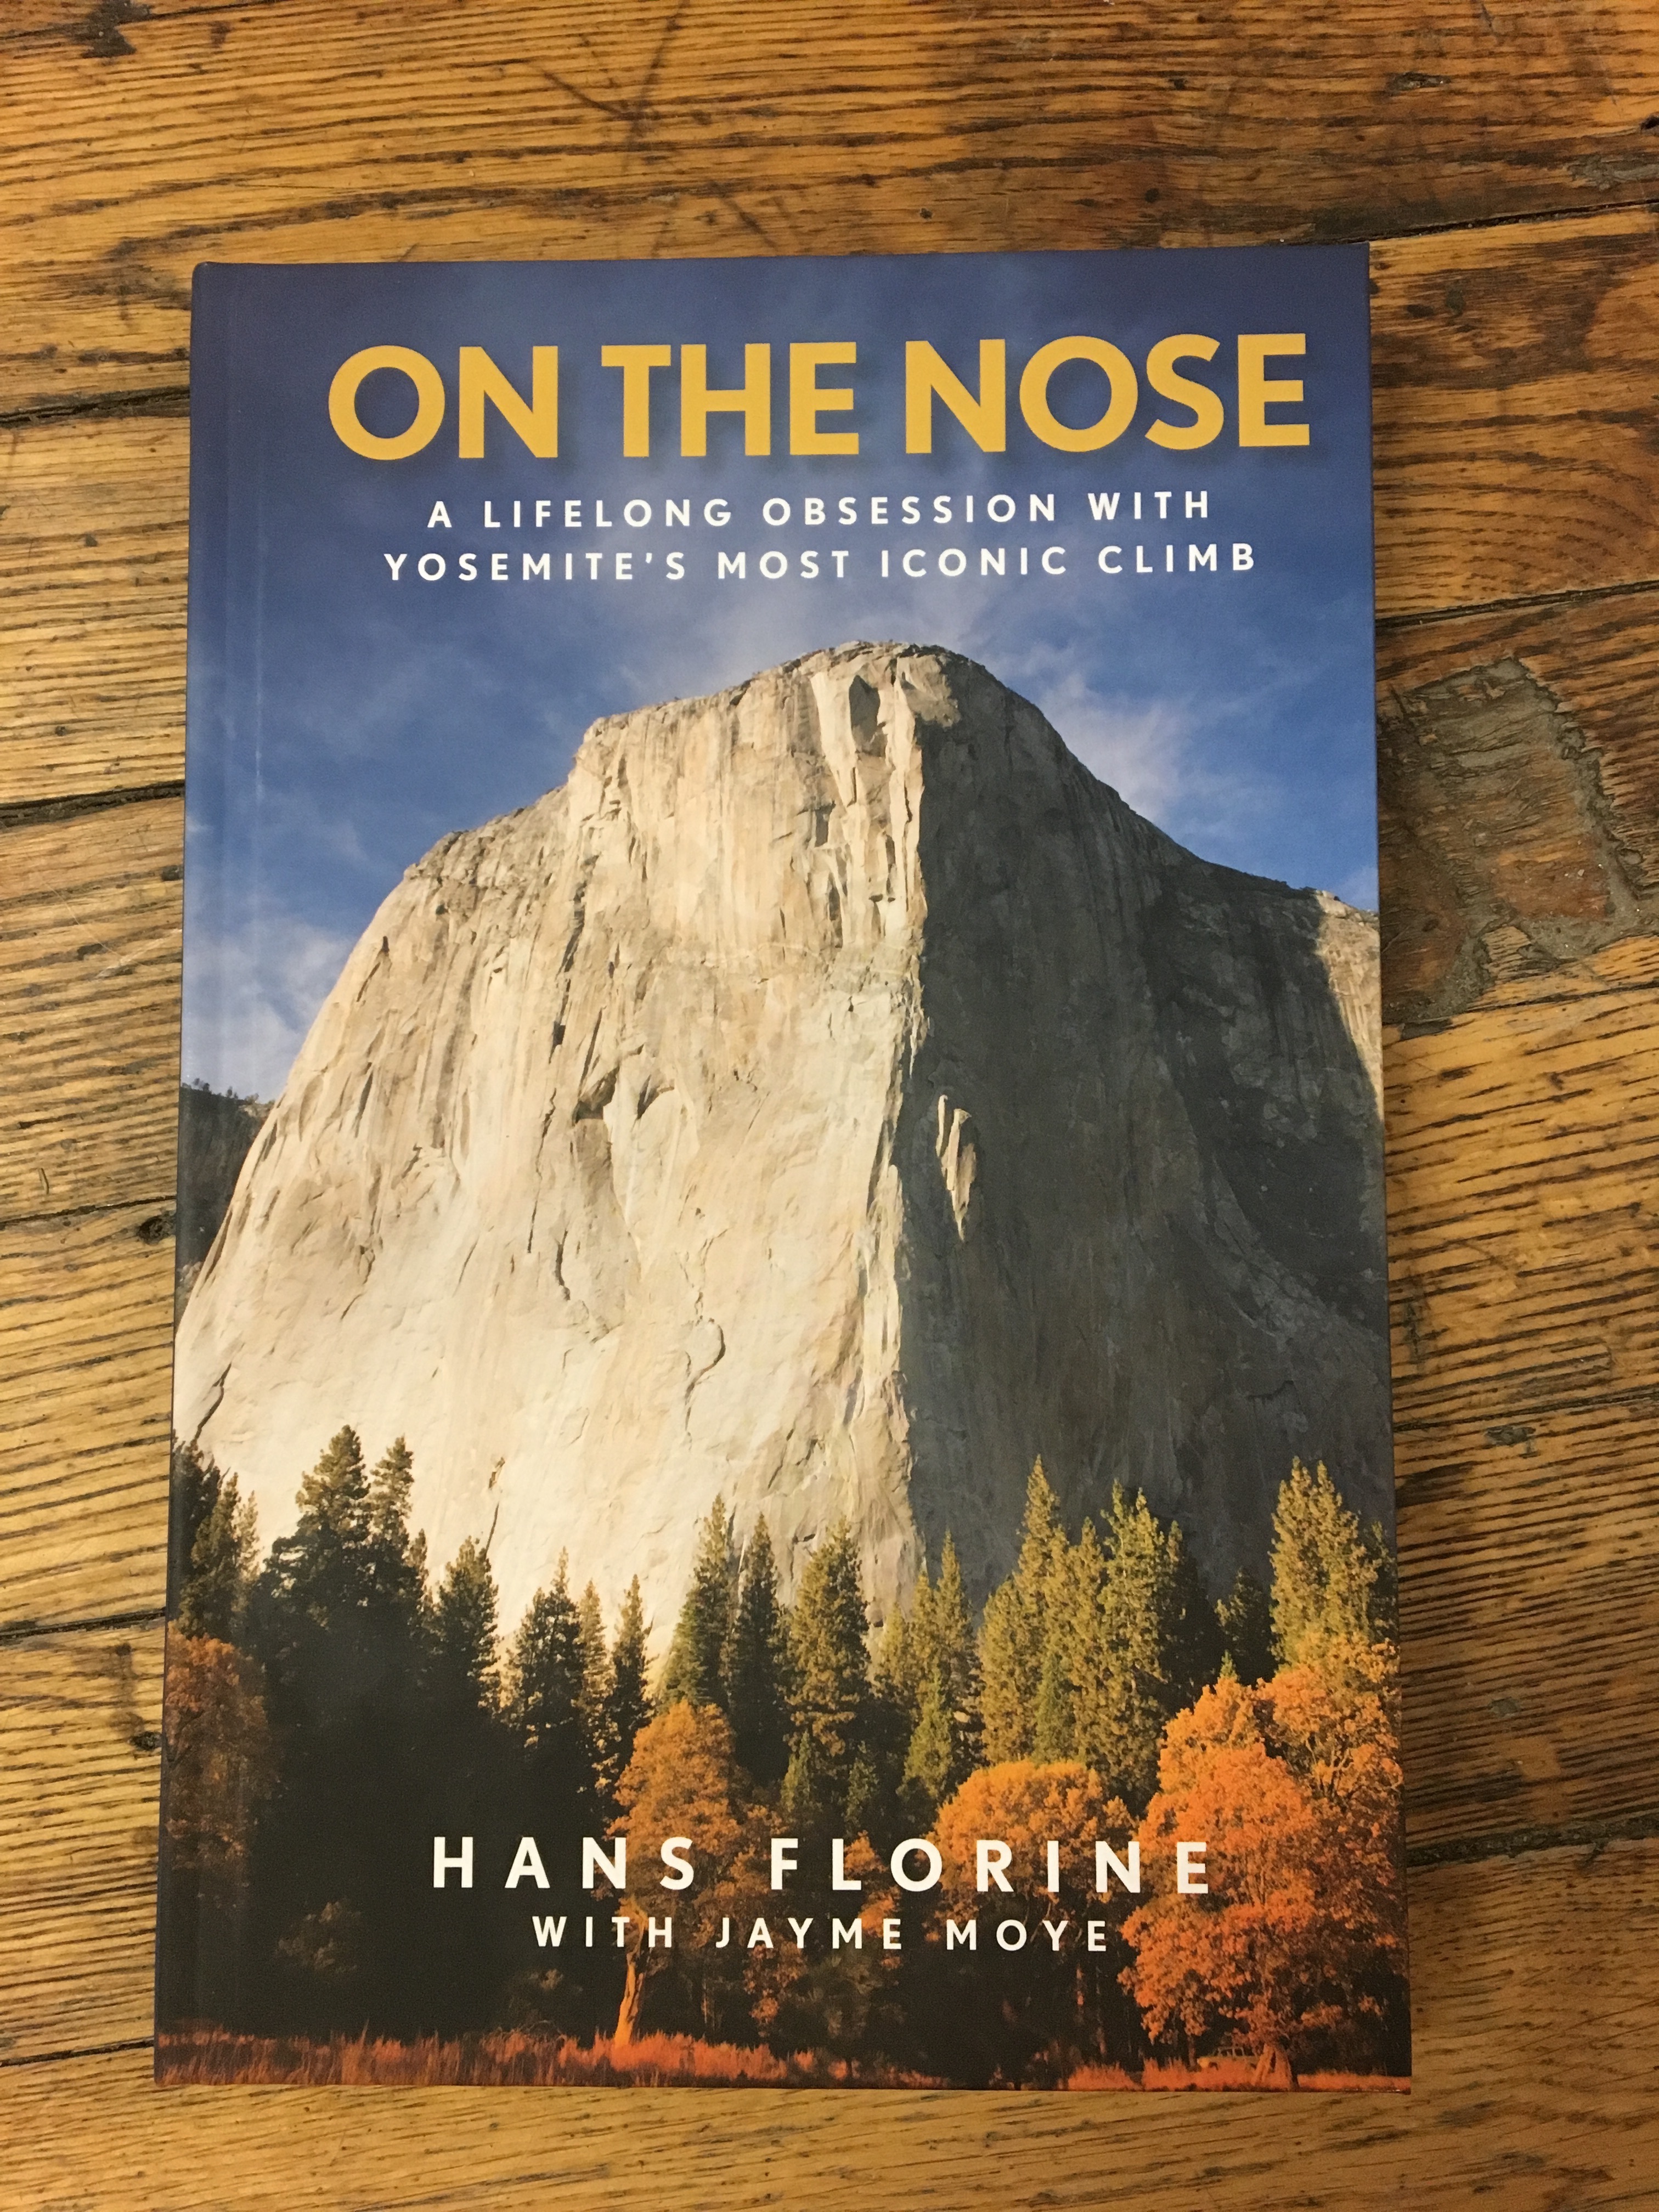 On the Nose by Hans Florine and Jayme Moye. Falcon Books, 2016. 203 pages. Hardcover, $25. [Photo] Paula Wright